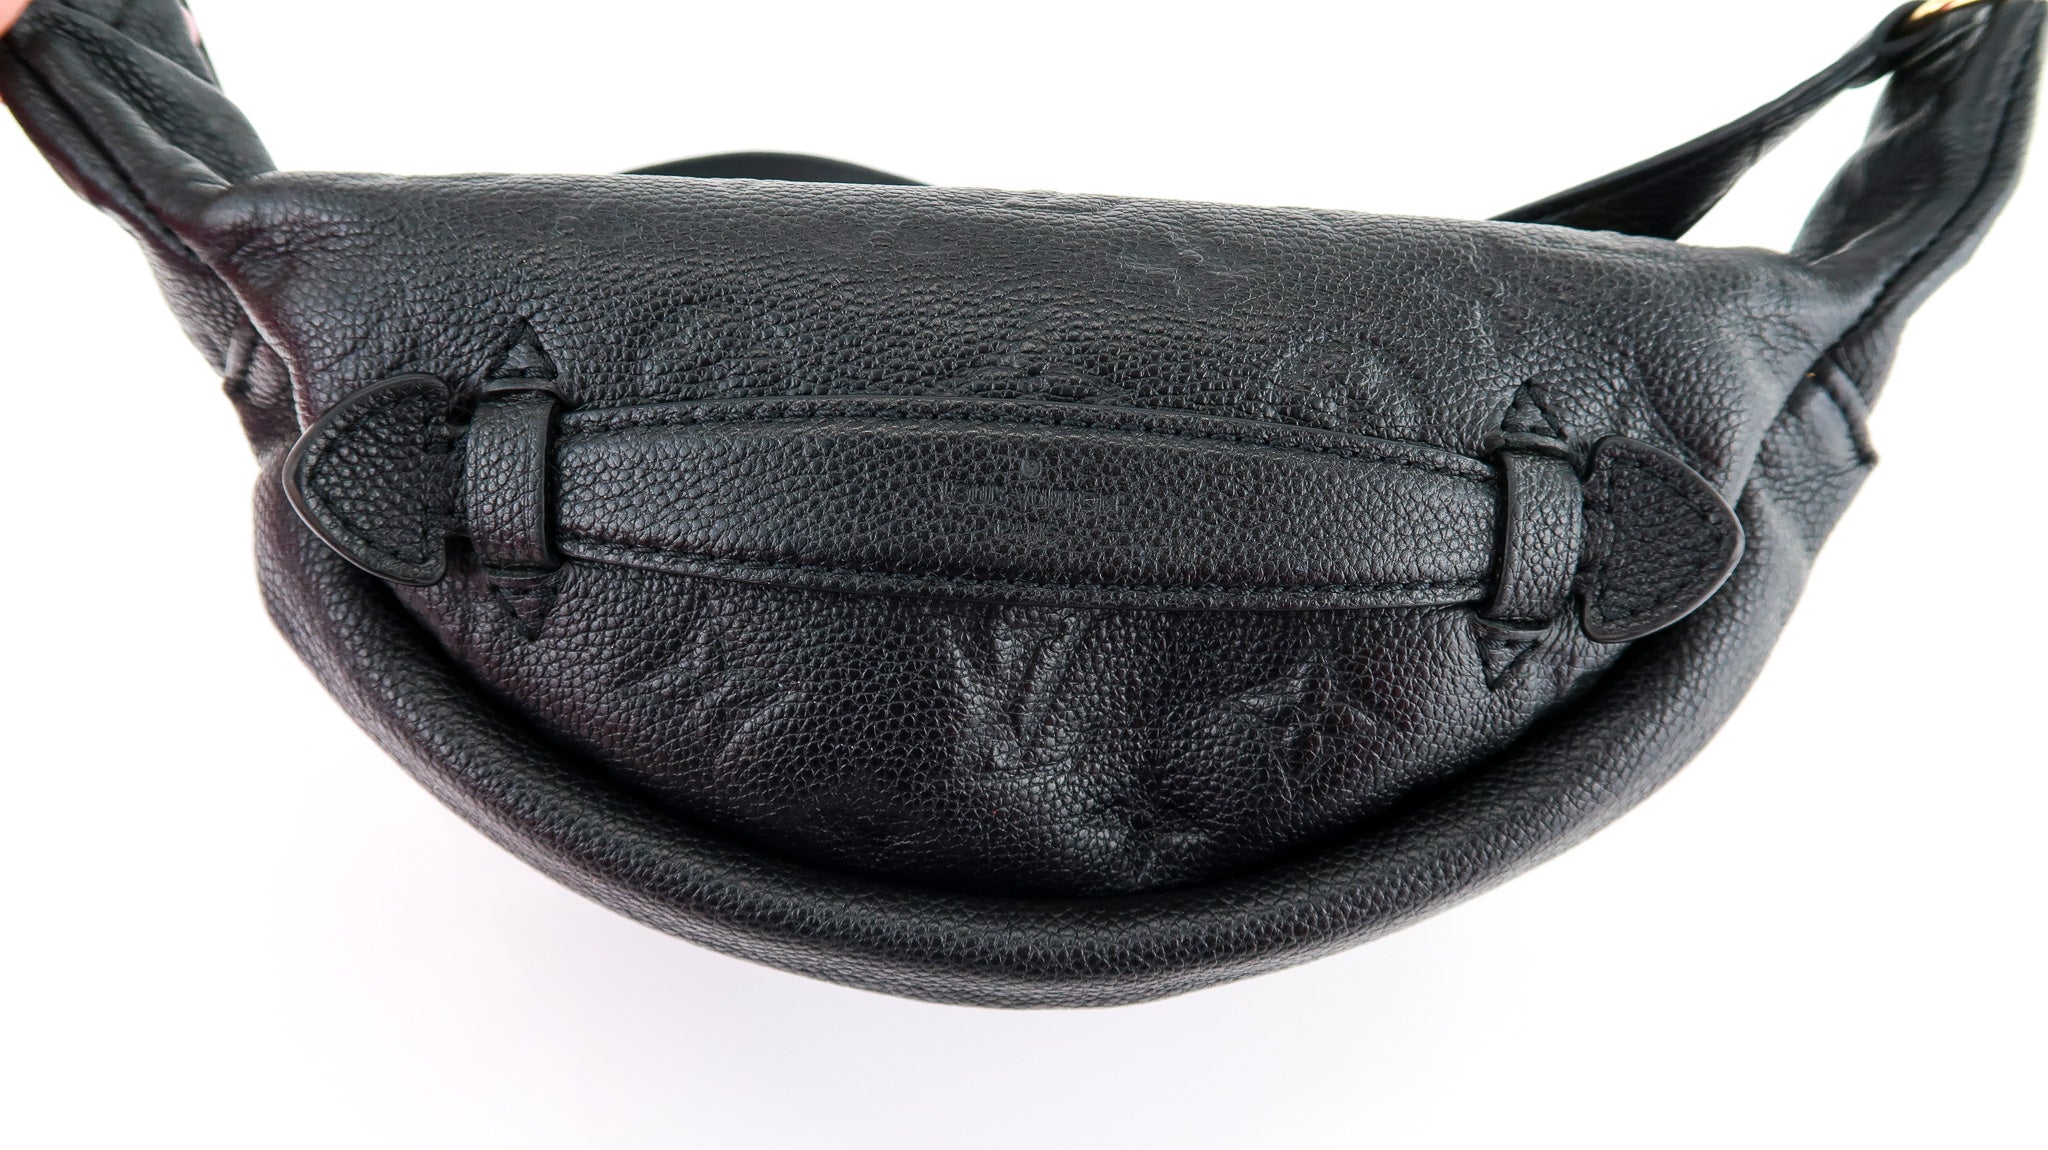 M44388 LOUIS VUITTON DISCOVERY BUMBAG MONOGRAM SHADOW CALF LEATHER